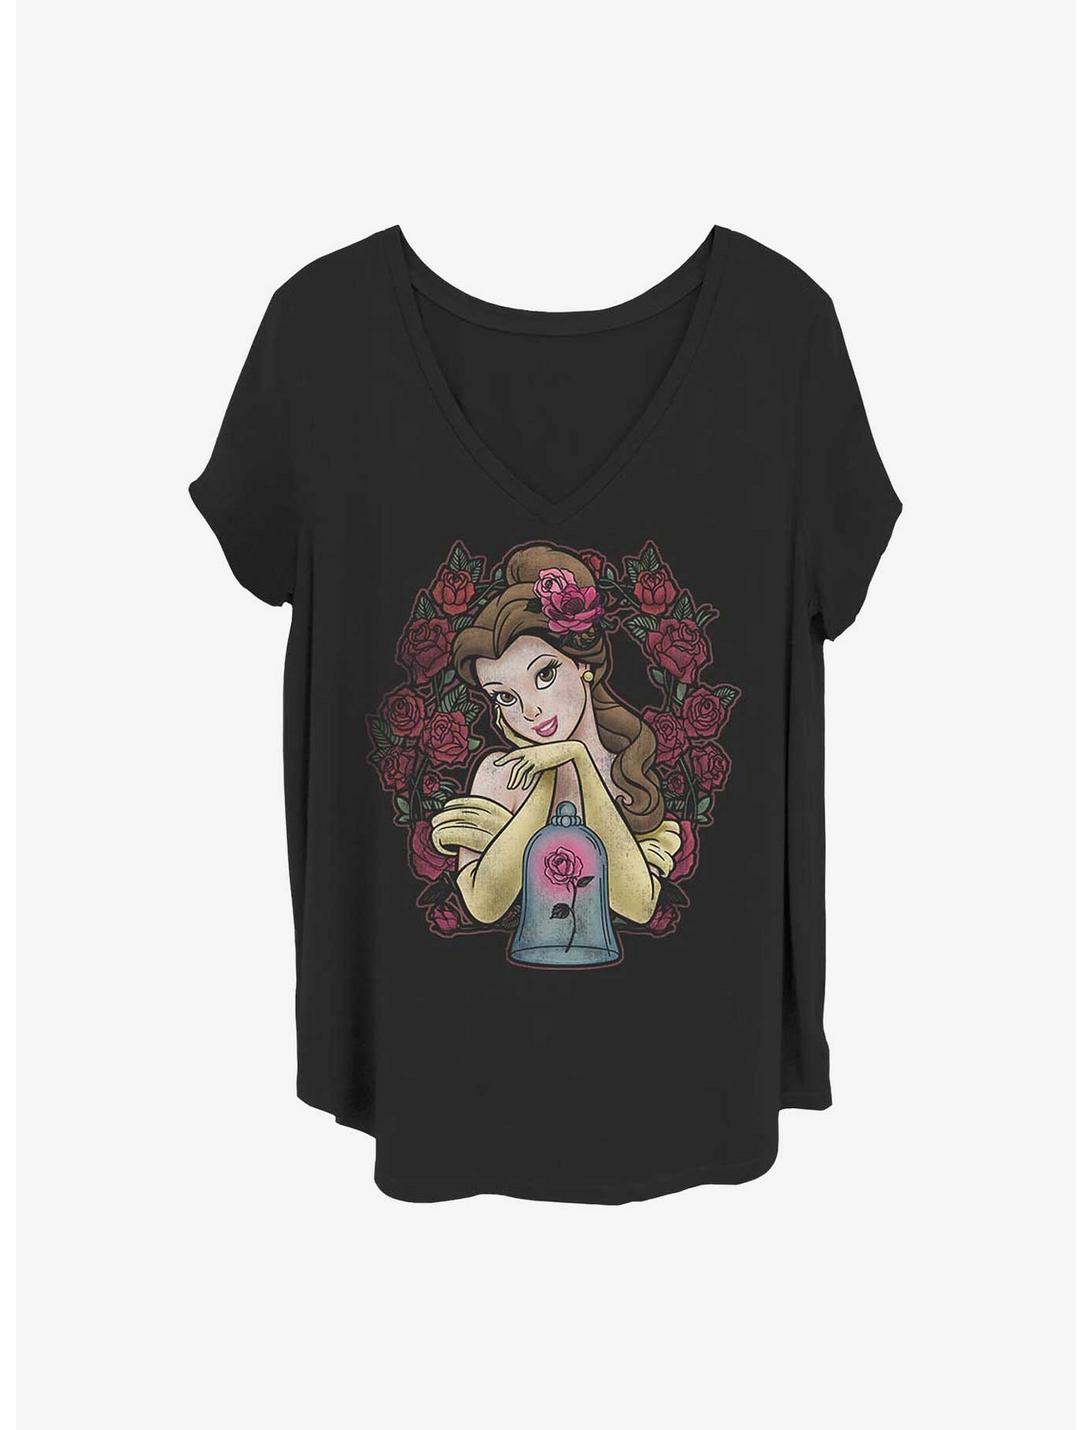 Disney Beauty and the Beast Rose Bell Girls T-Shirt Plus Size, BLACK, hi-res